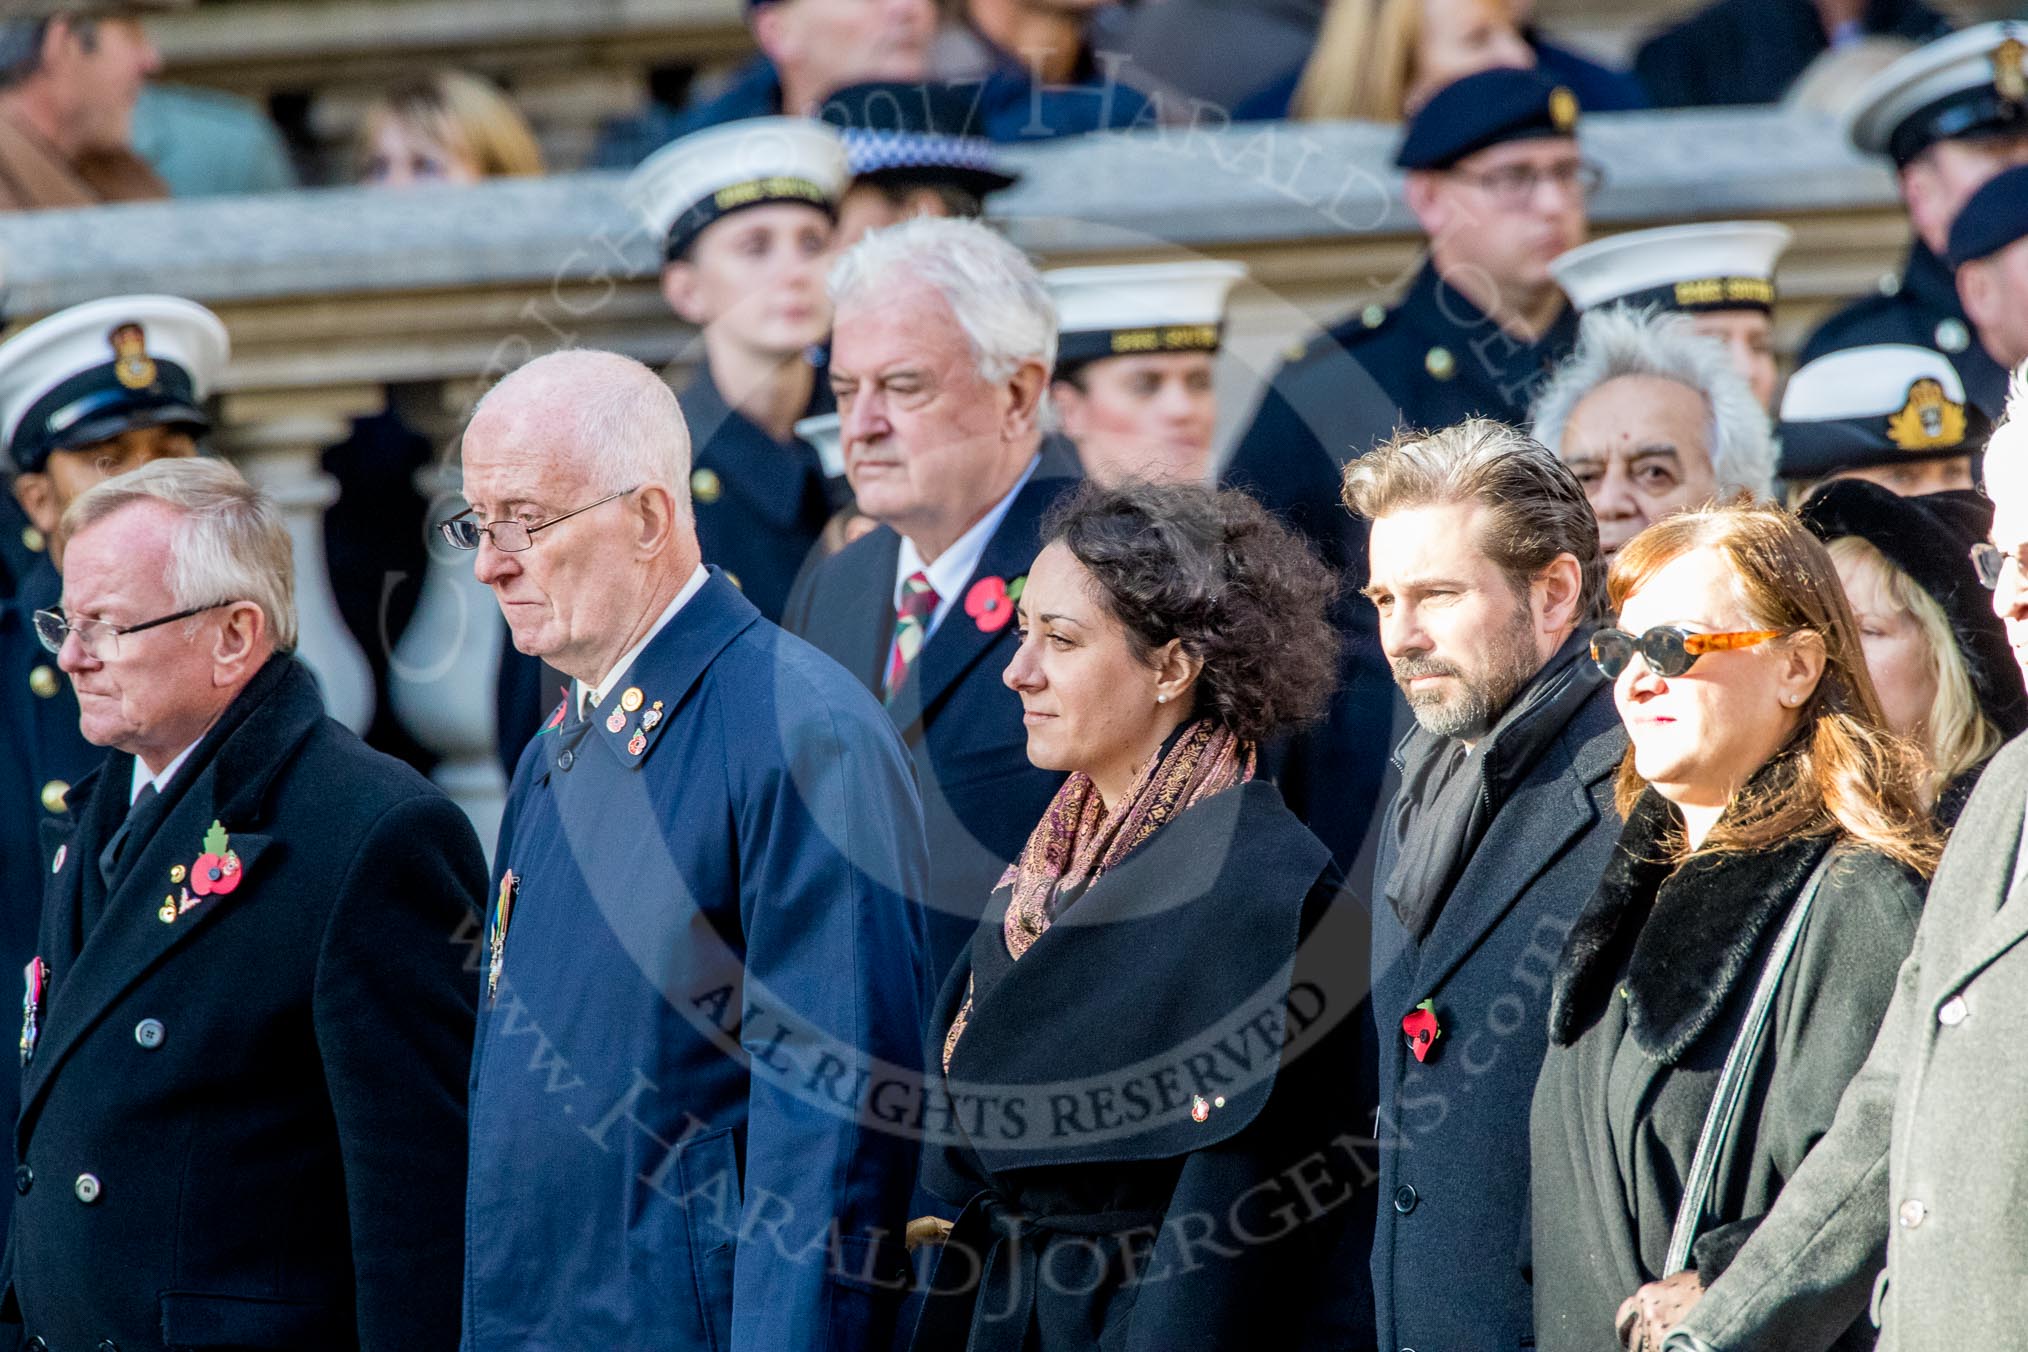 Rotary International (Group M32, 24 members) during the Royal British Legion March Past on Remembrance Sunday at the Cenotaph, Whitehall, Westminster, London, 11 November 2018, 12:28.